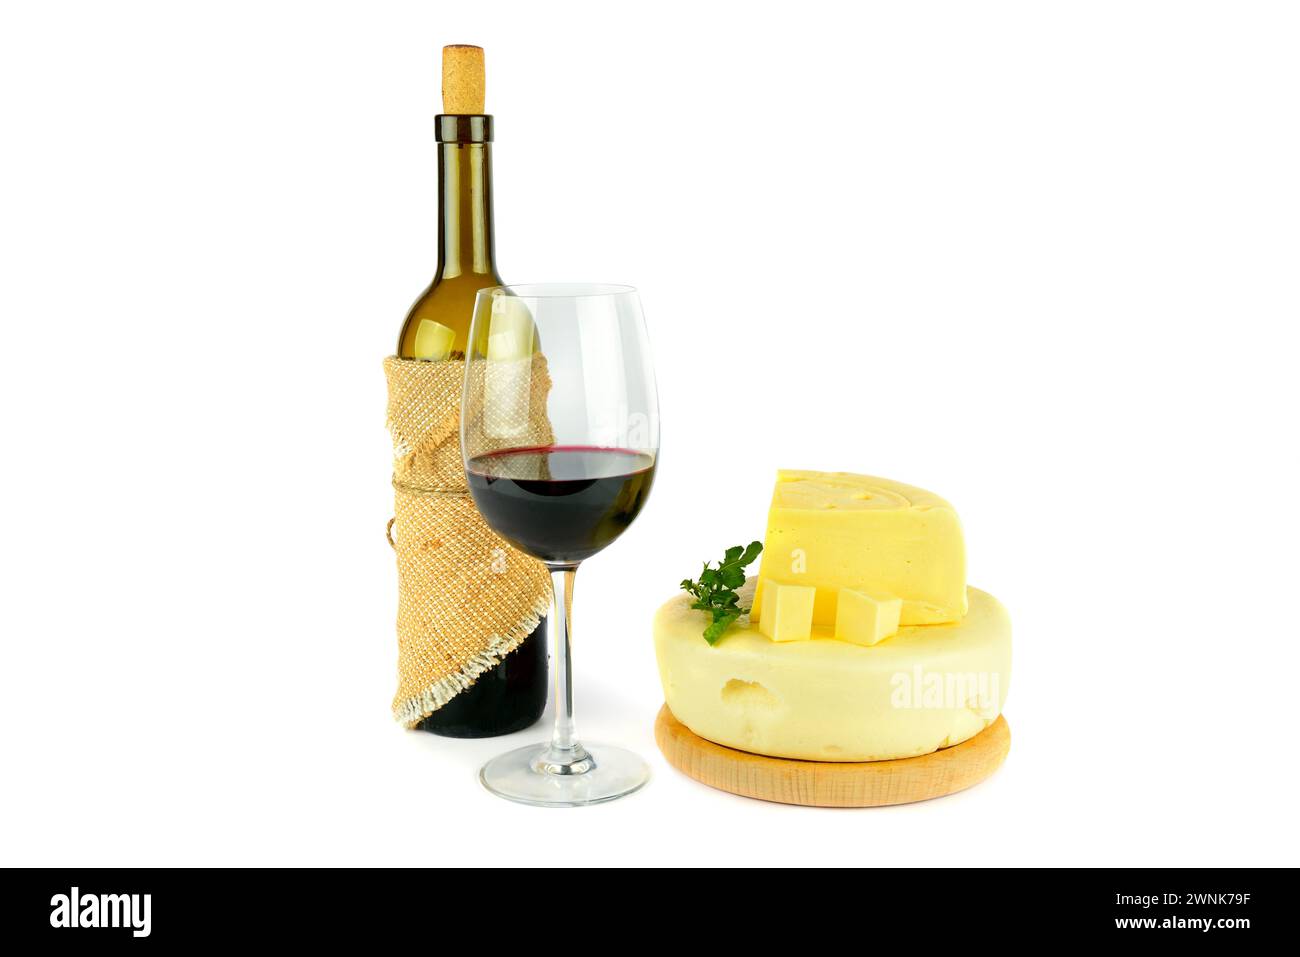 Bottle with glass of red wine and cheese isolated on white background. Stock Photo